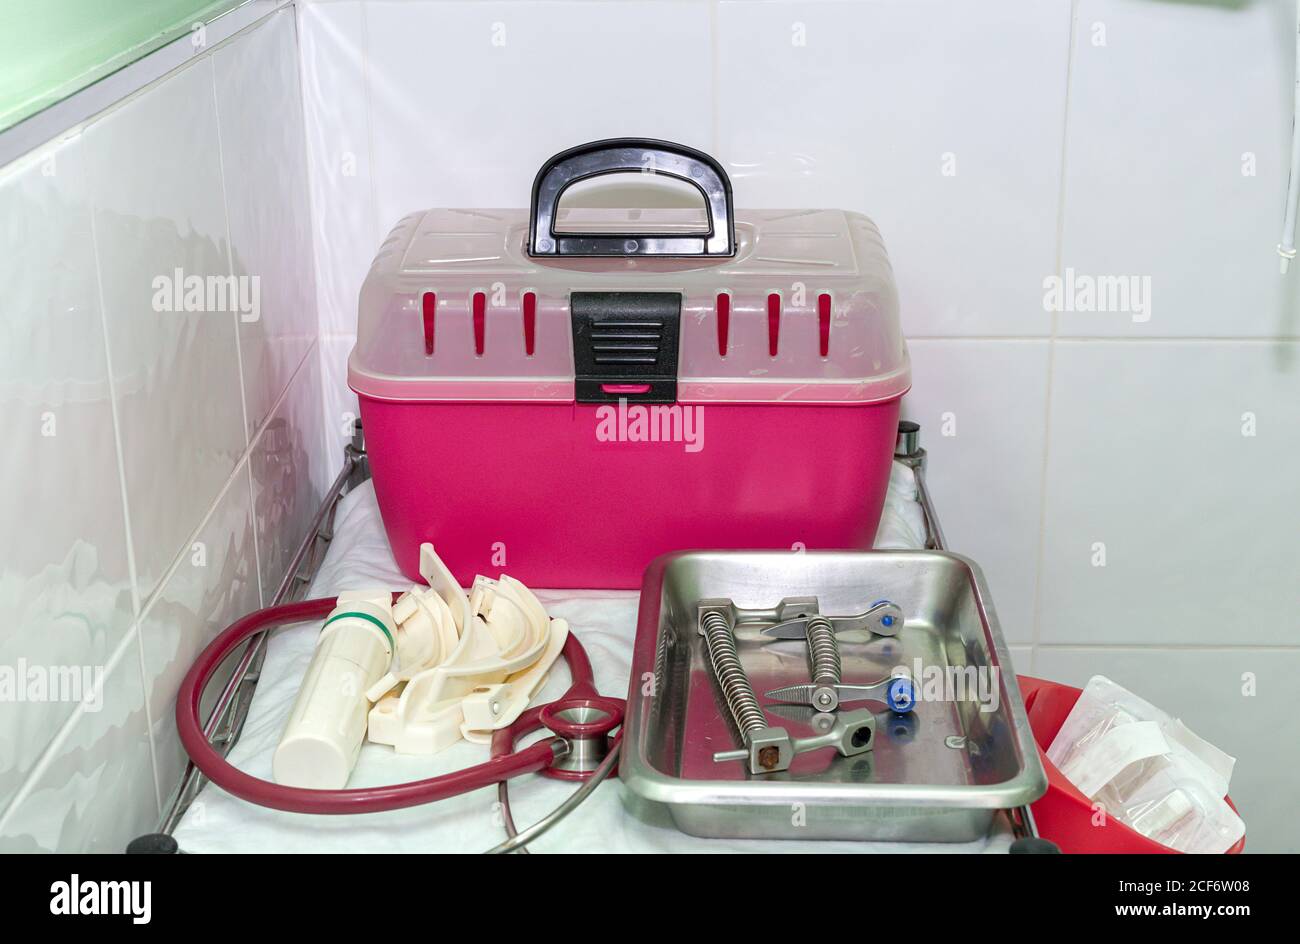 Pink plastic box for carrying cats and medical tools on surgical tray by tiled wall in veterinary clinic Stock Photo